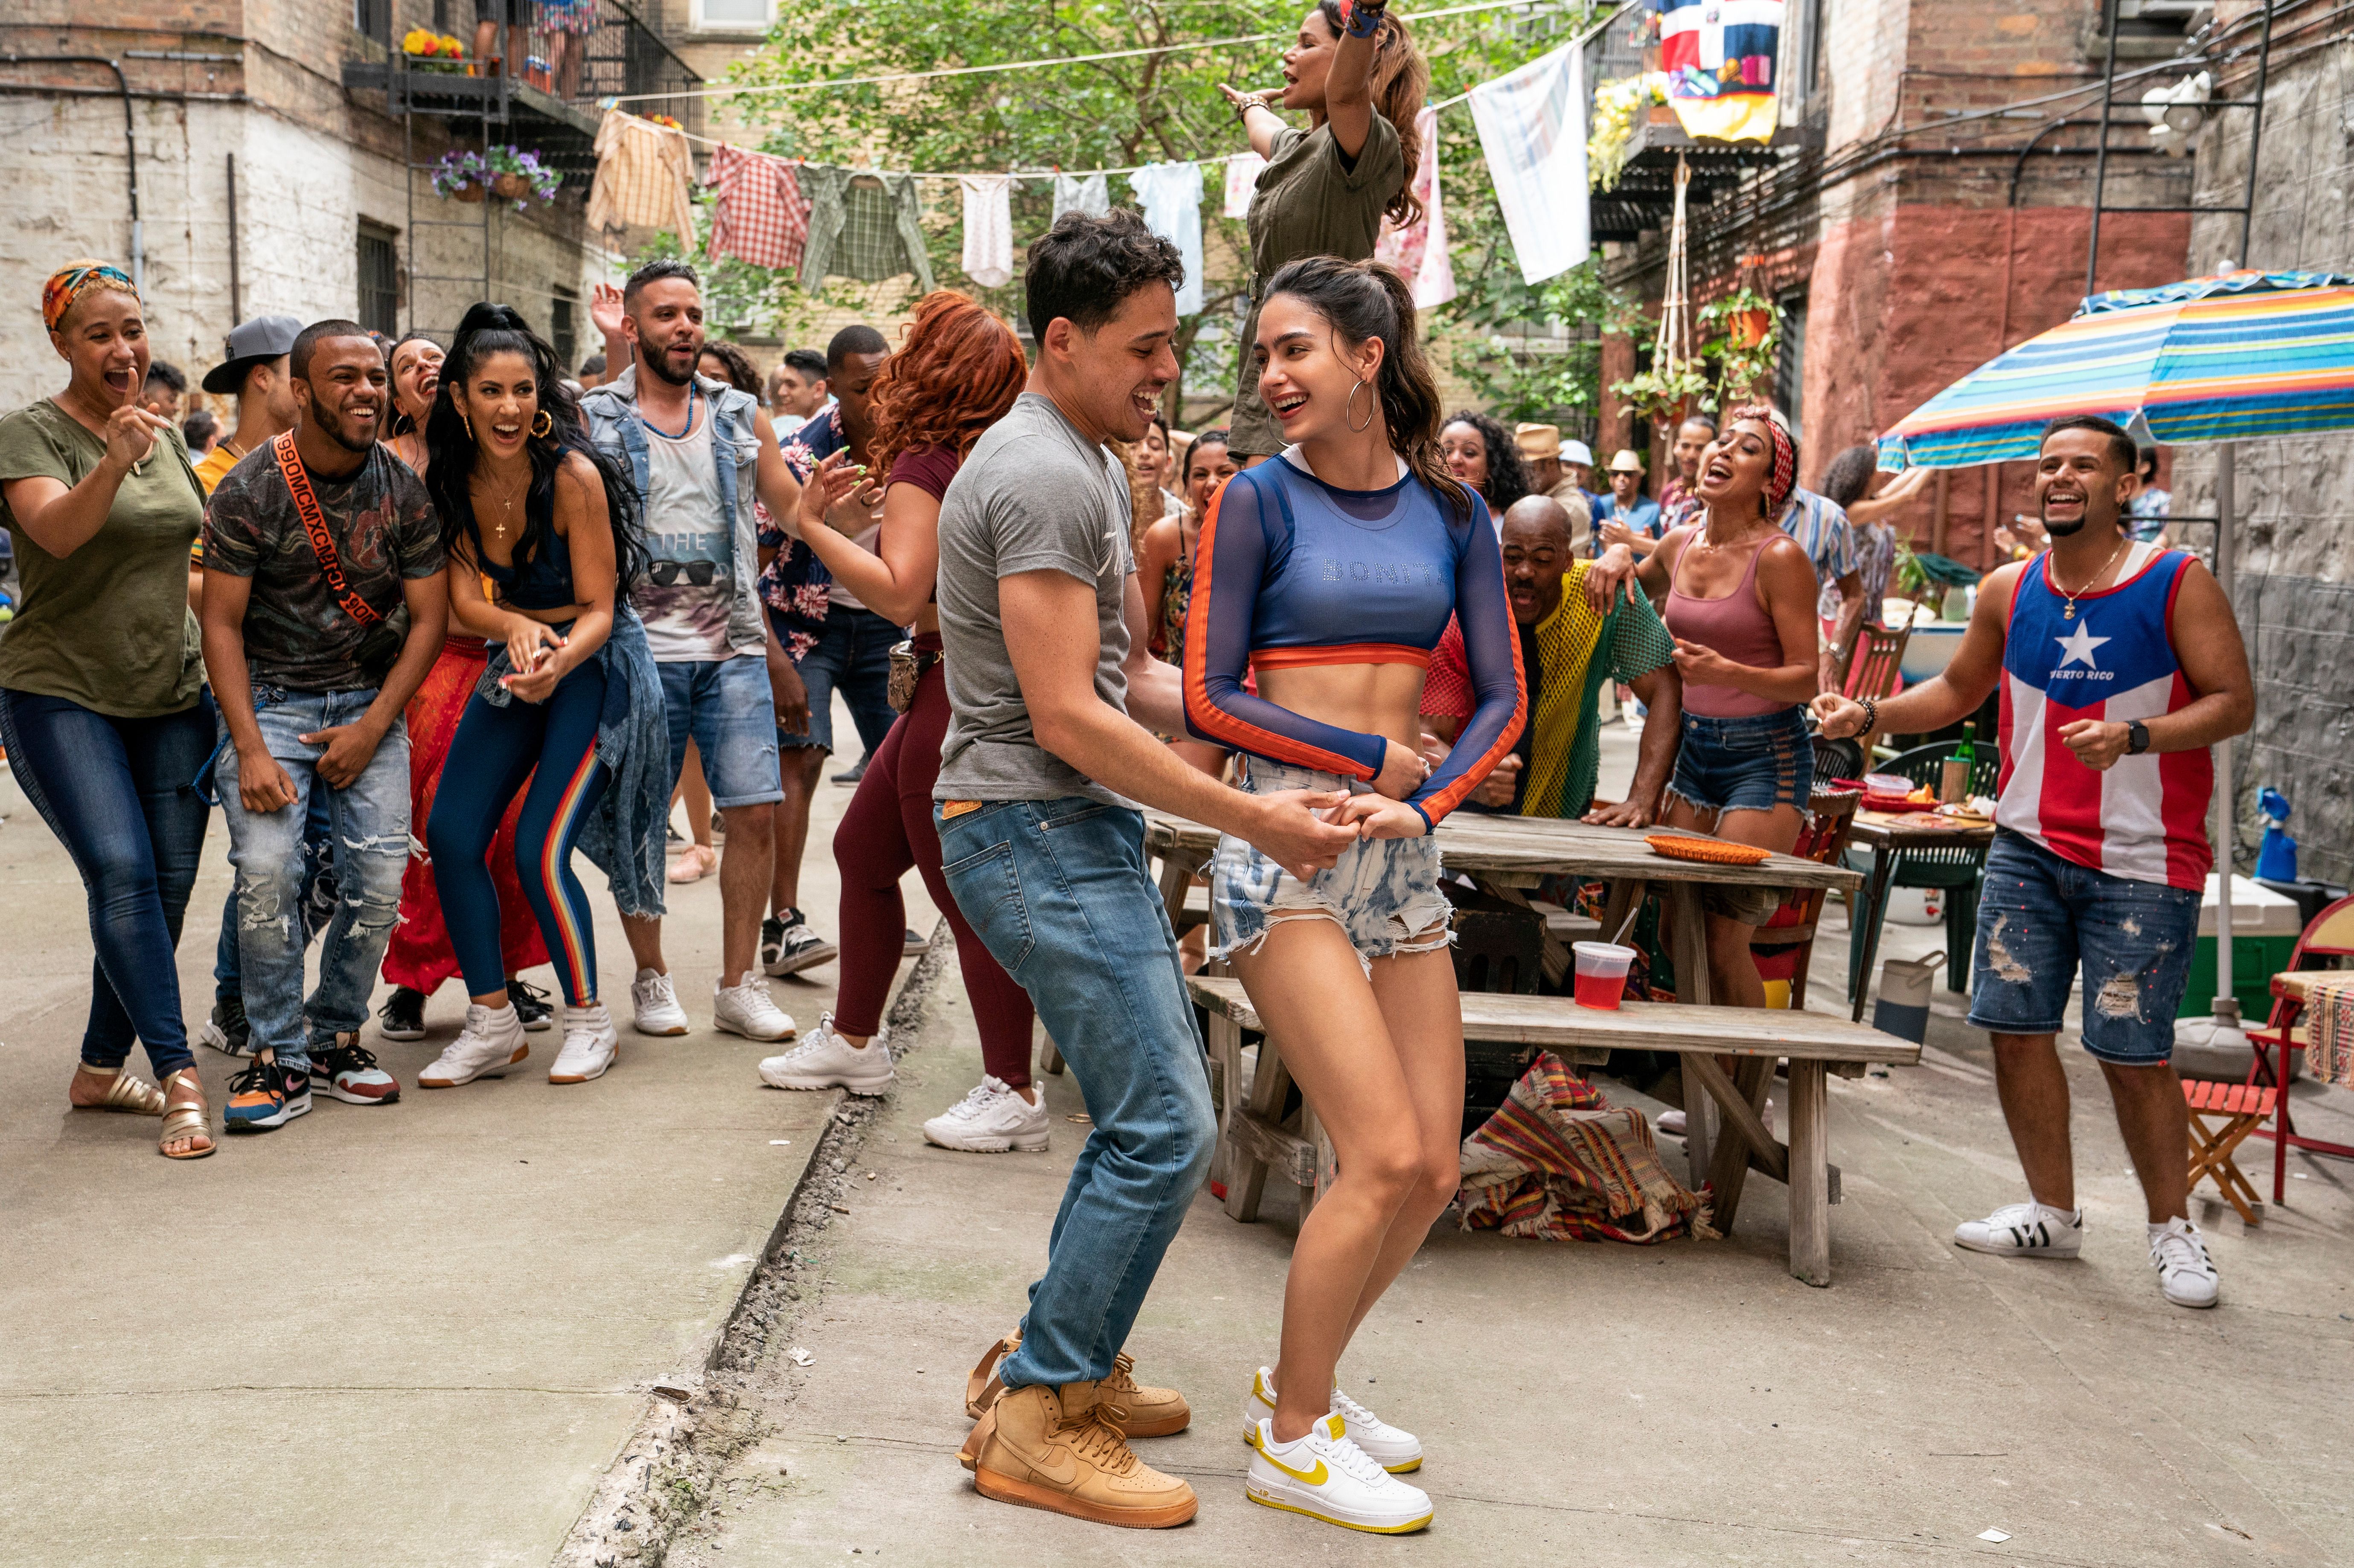 In the Heights' makes muted debut, edged by 'A Quiet Place'. KRQE News 13